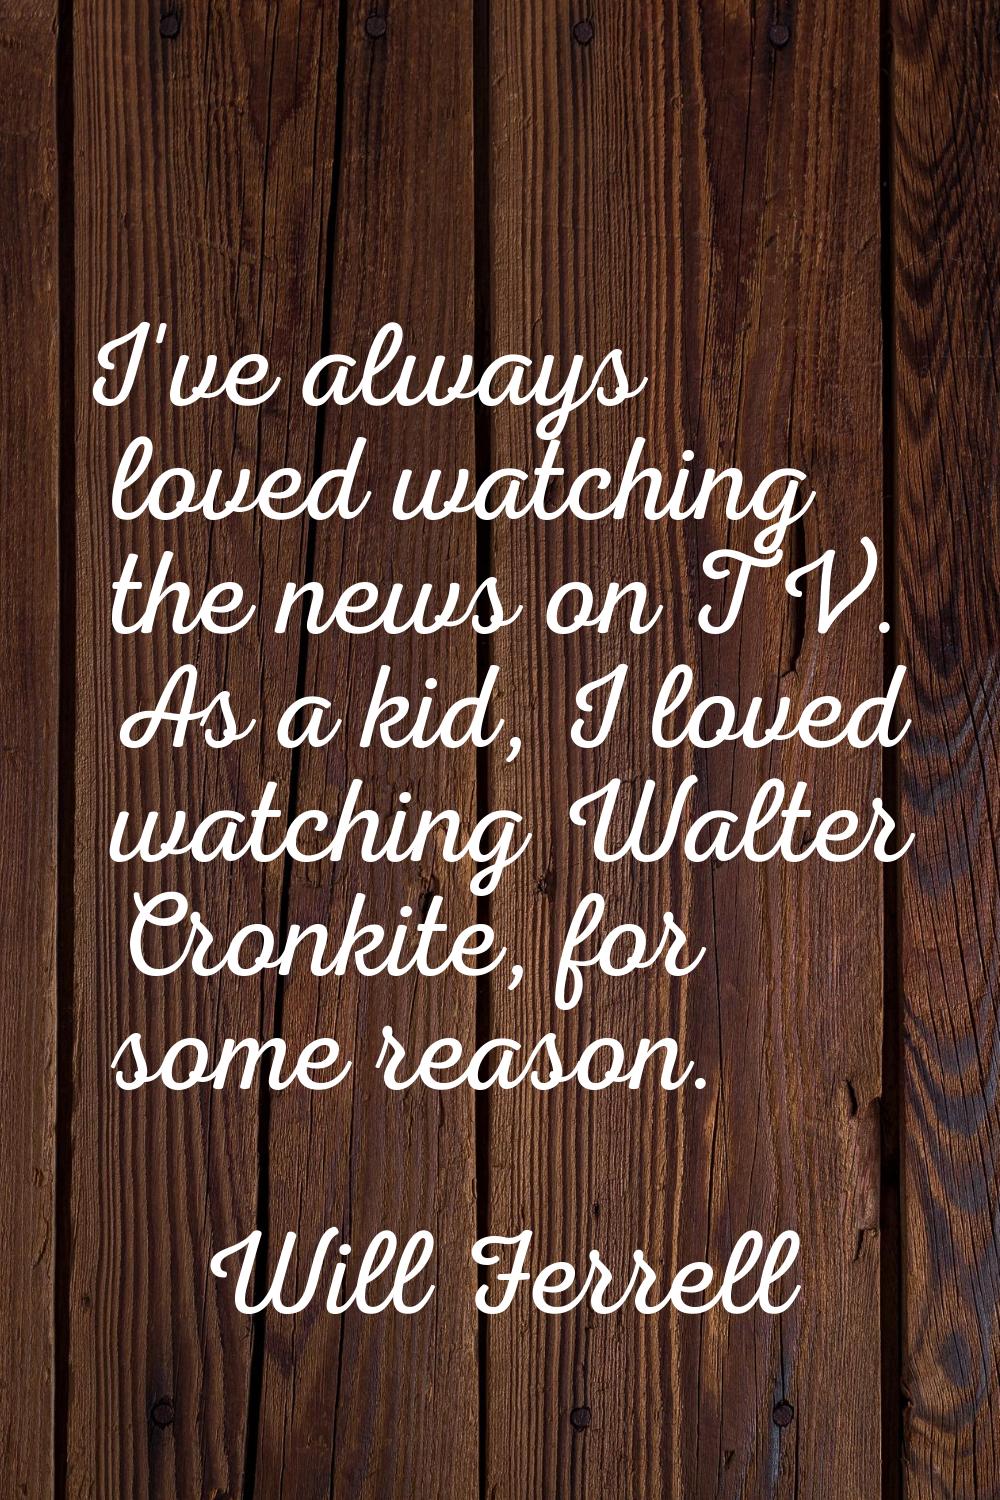 I've always loved watching the news on TV. As a kid, I loved watching Walter Cronkite, for some rea